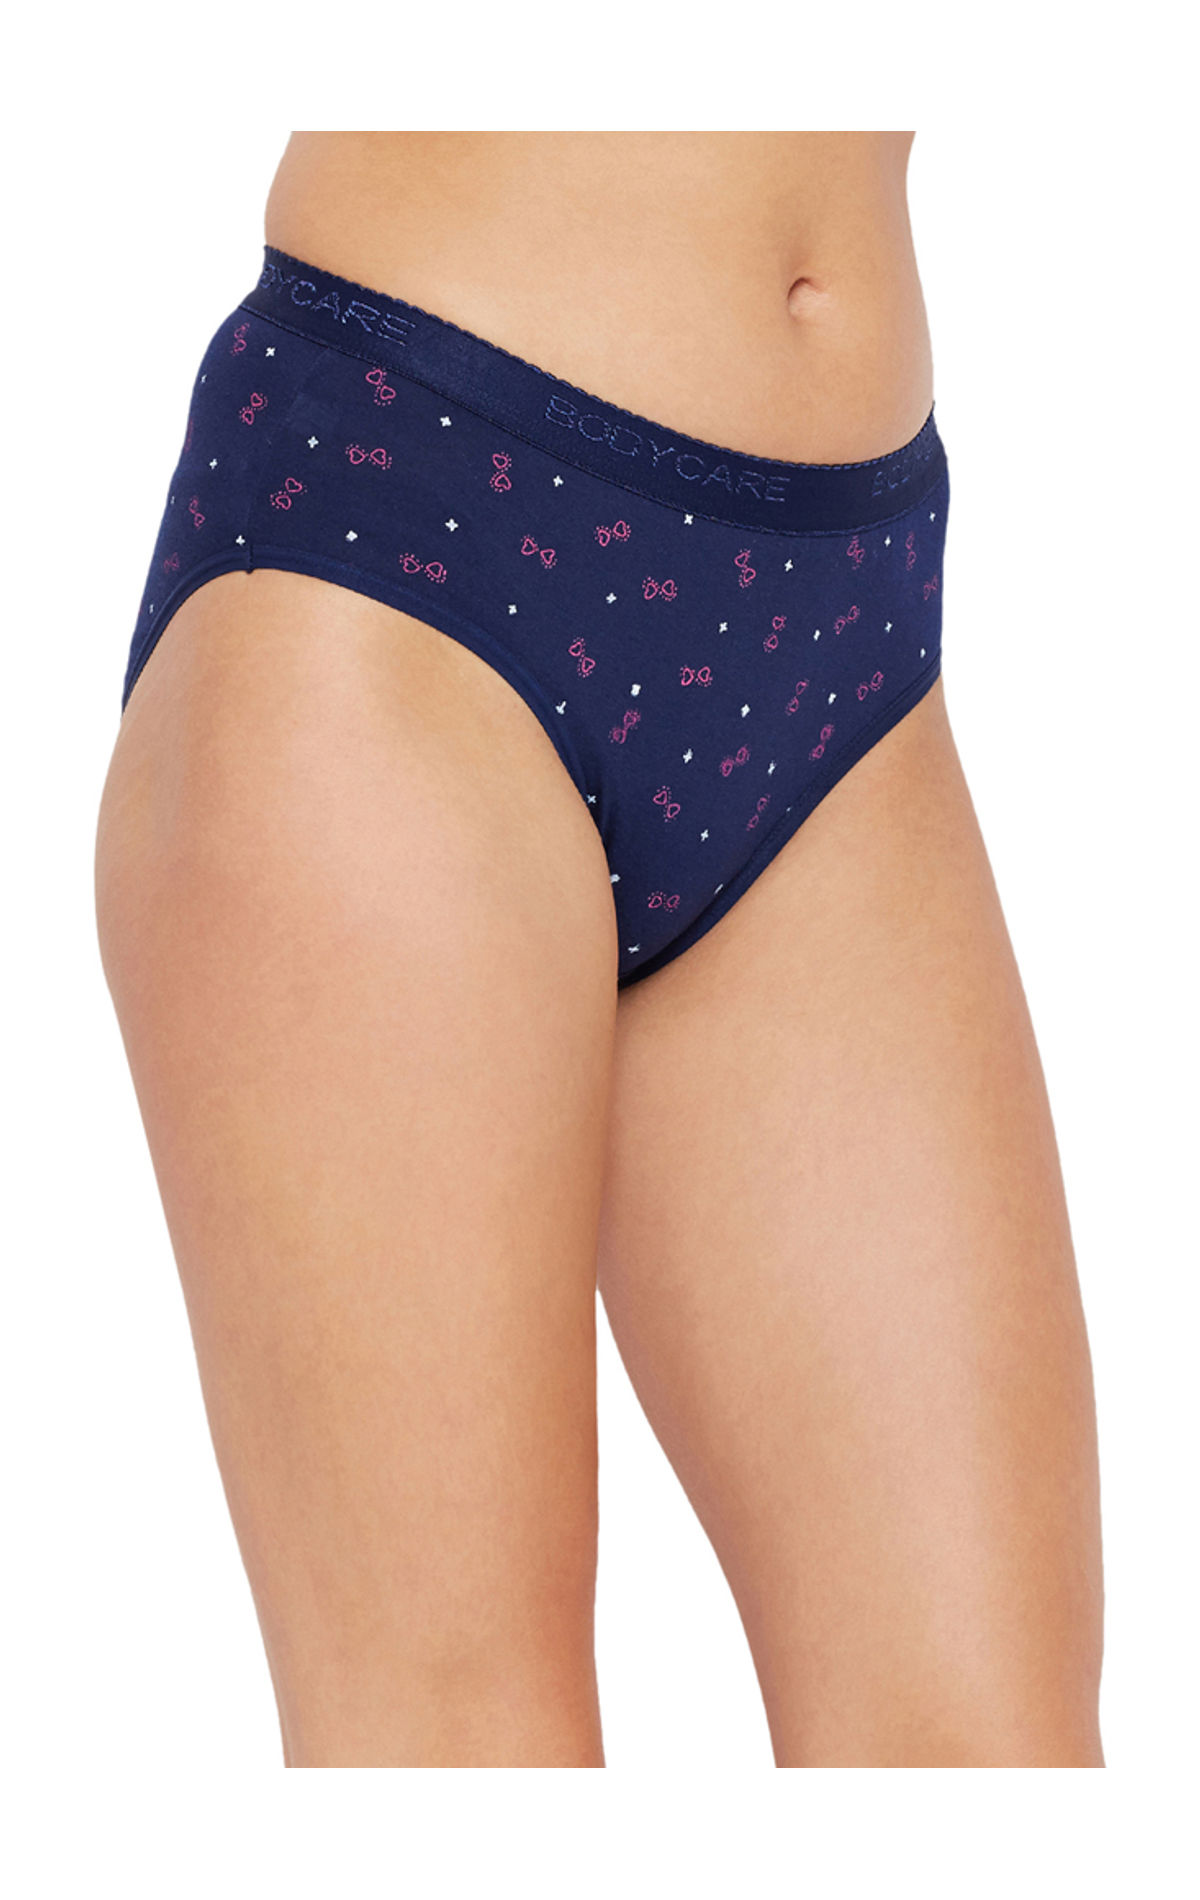 BODYCARE COTTON PRINTED HIPSTER BRIEFS 16000 - PACK OF 03 [ NARI 1605]